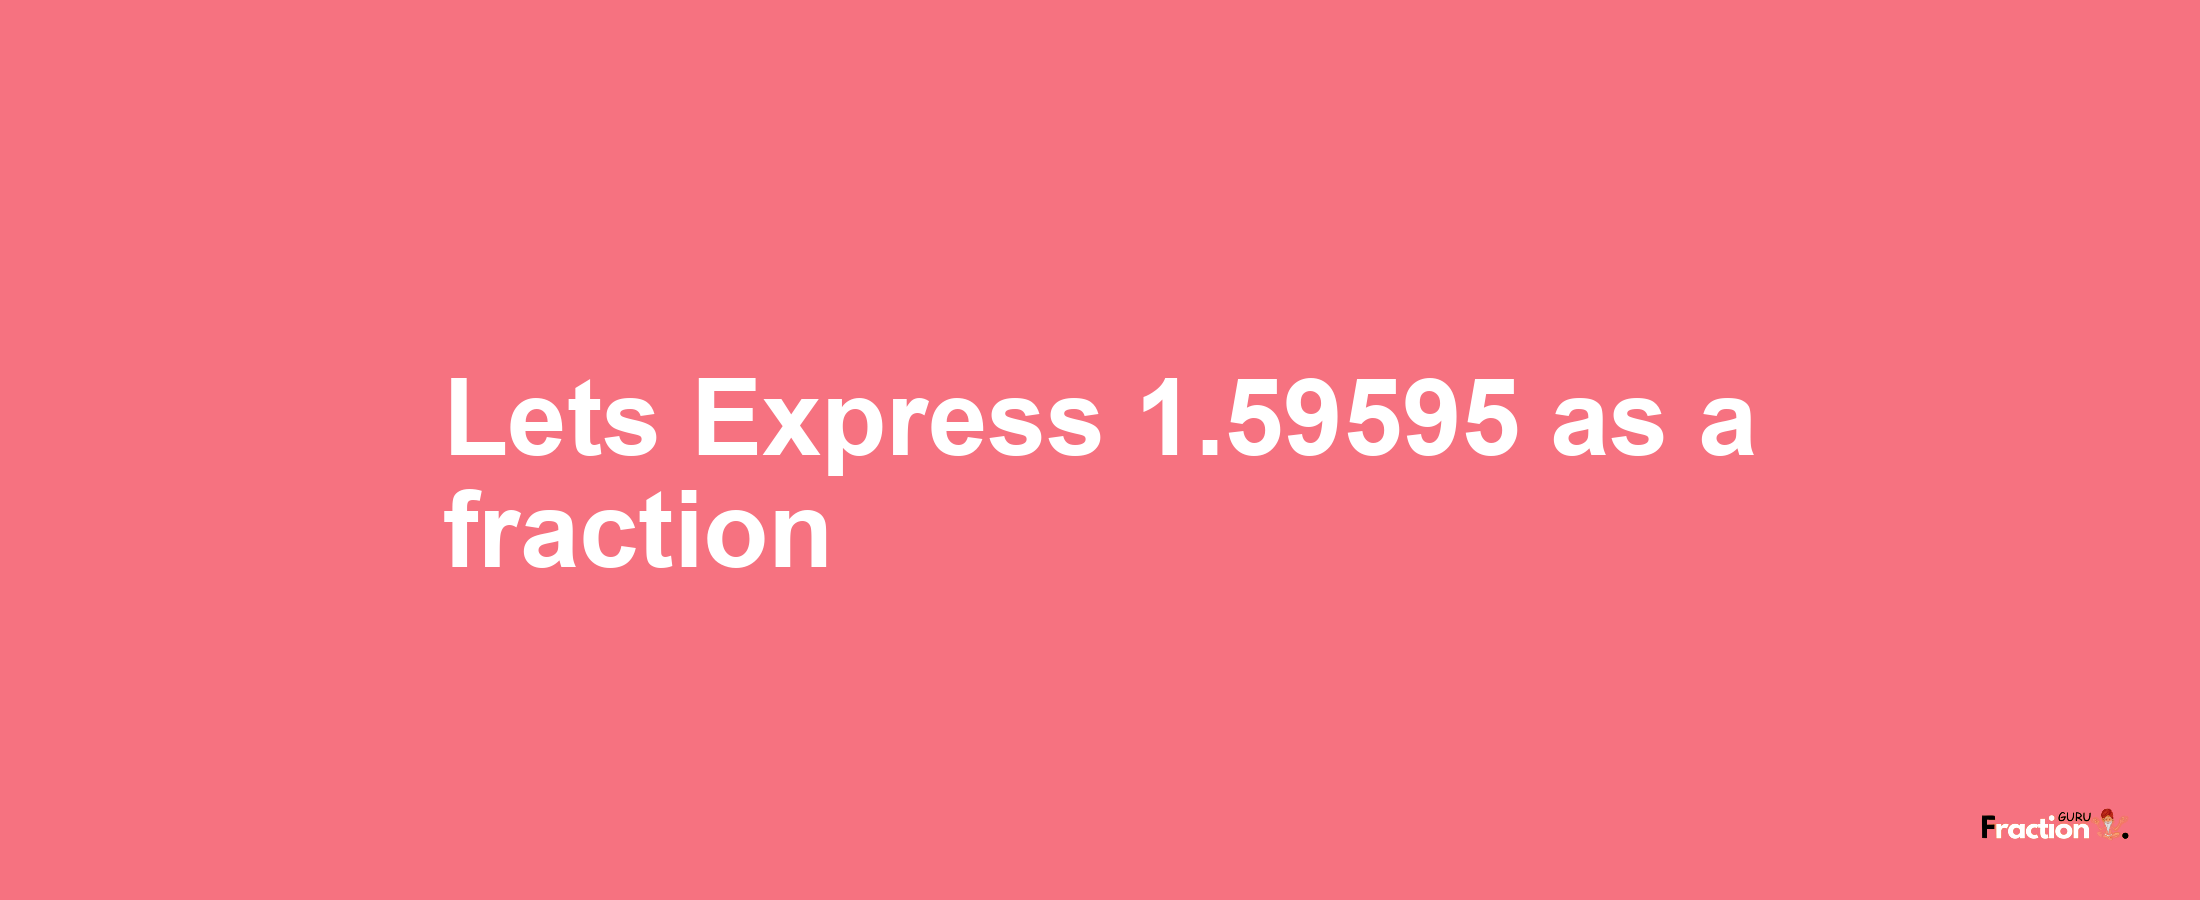 Lets Express 1.59595 as afraction